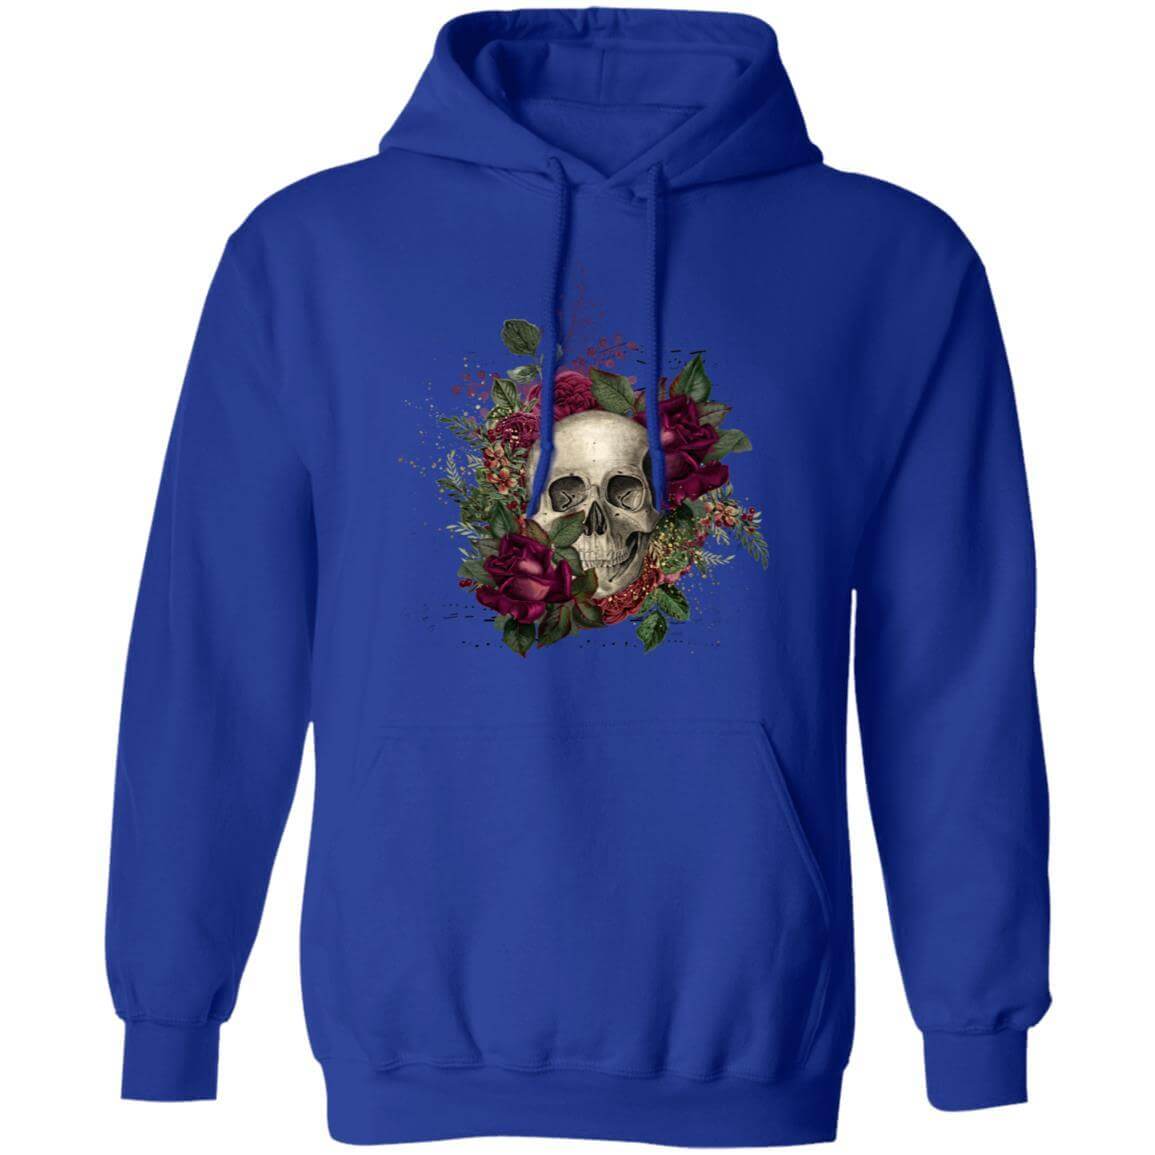 Sweatshirts Royal / S Winey Bitches Co Floral Skull Design #2 Pullover Hoodie 8 oz. WineyBitchesCo